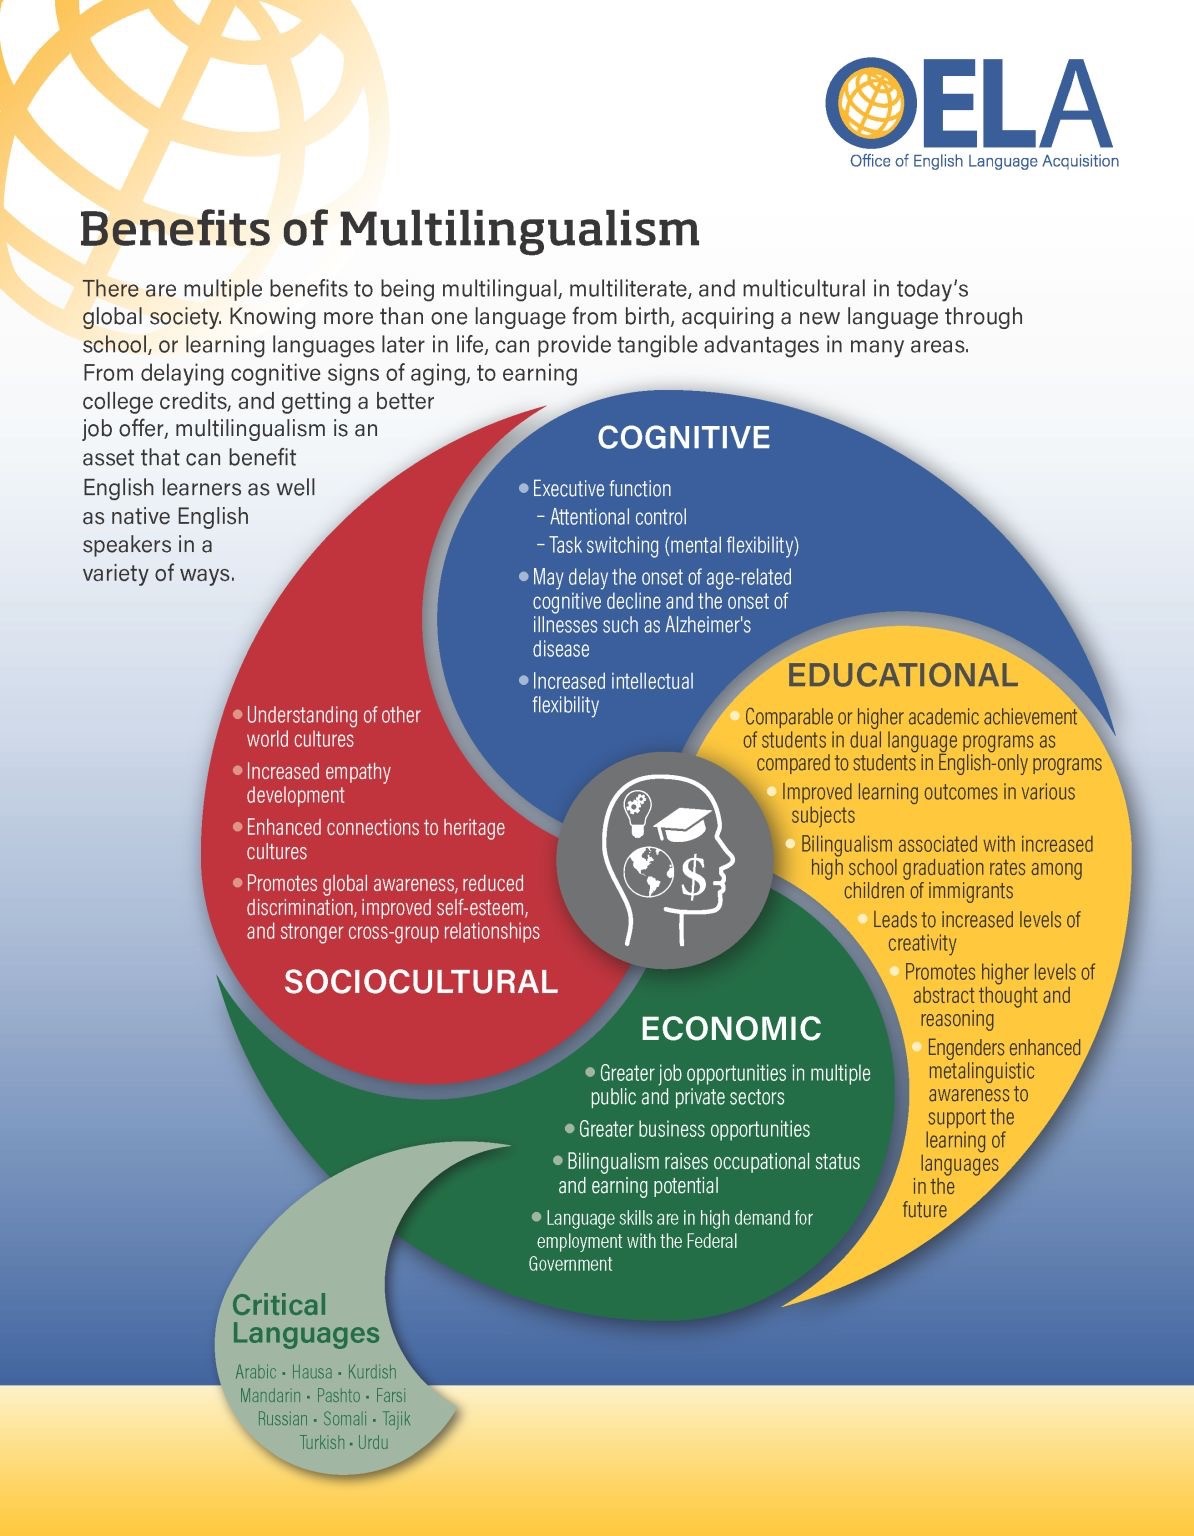 Benefits of Multilingualism diagram with sprial sections indicating cognitive, educationa, economic, and sociocultural